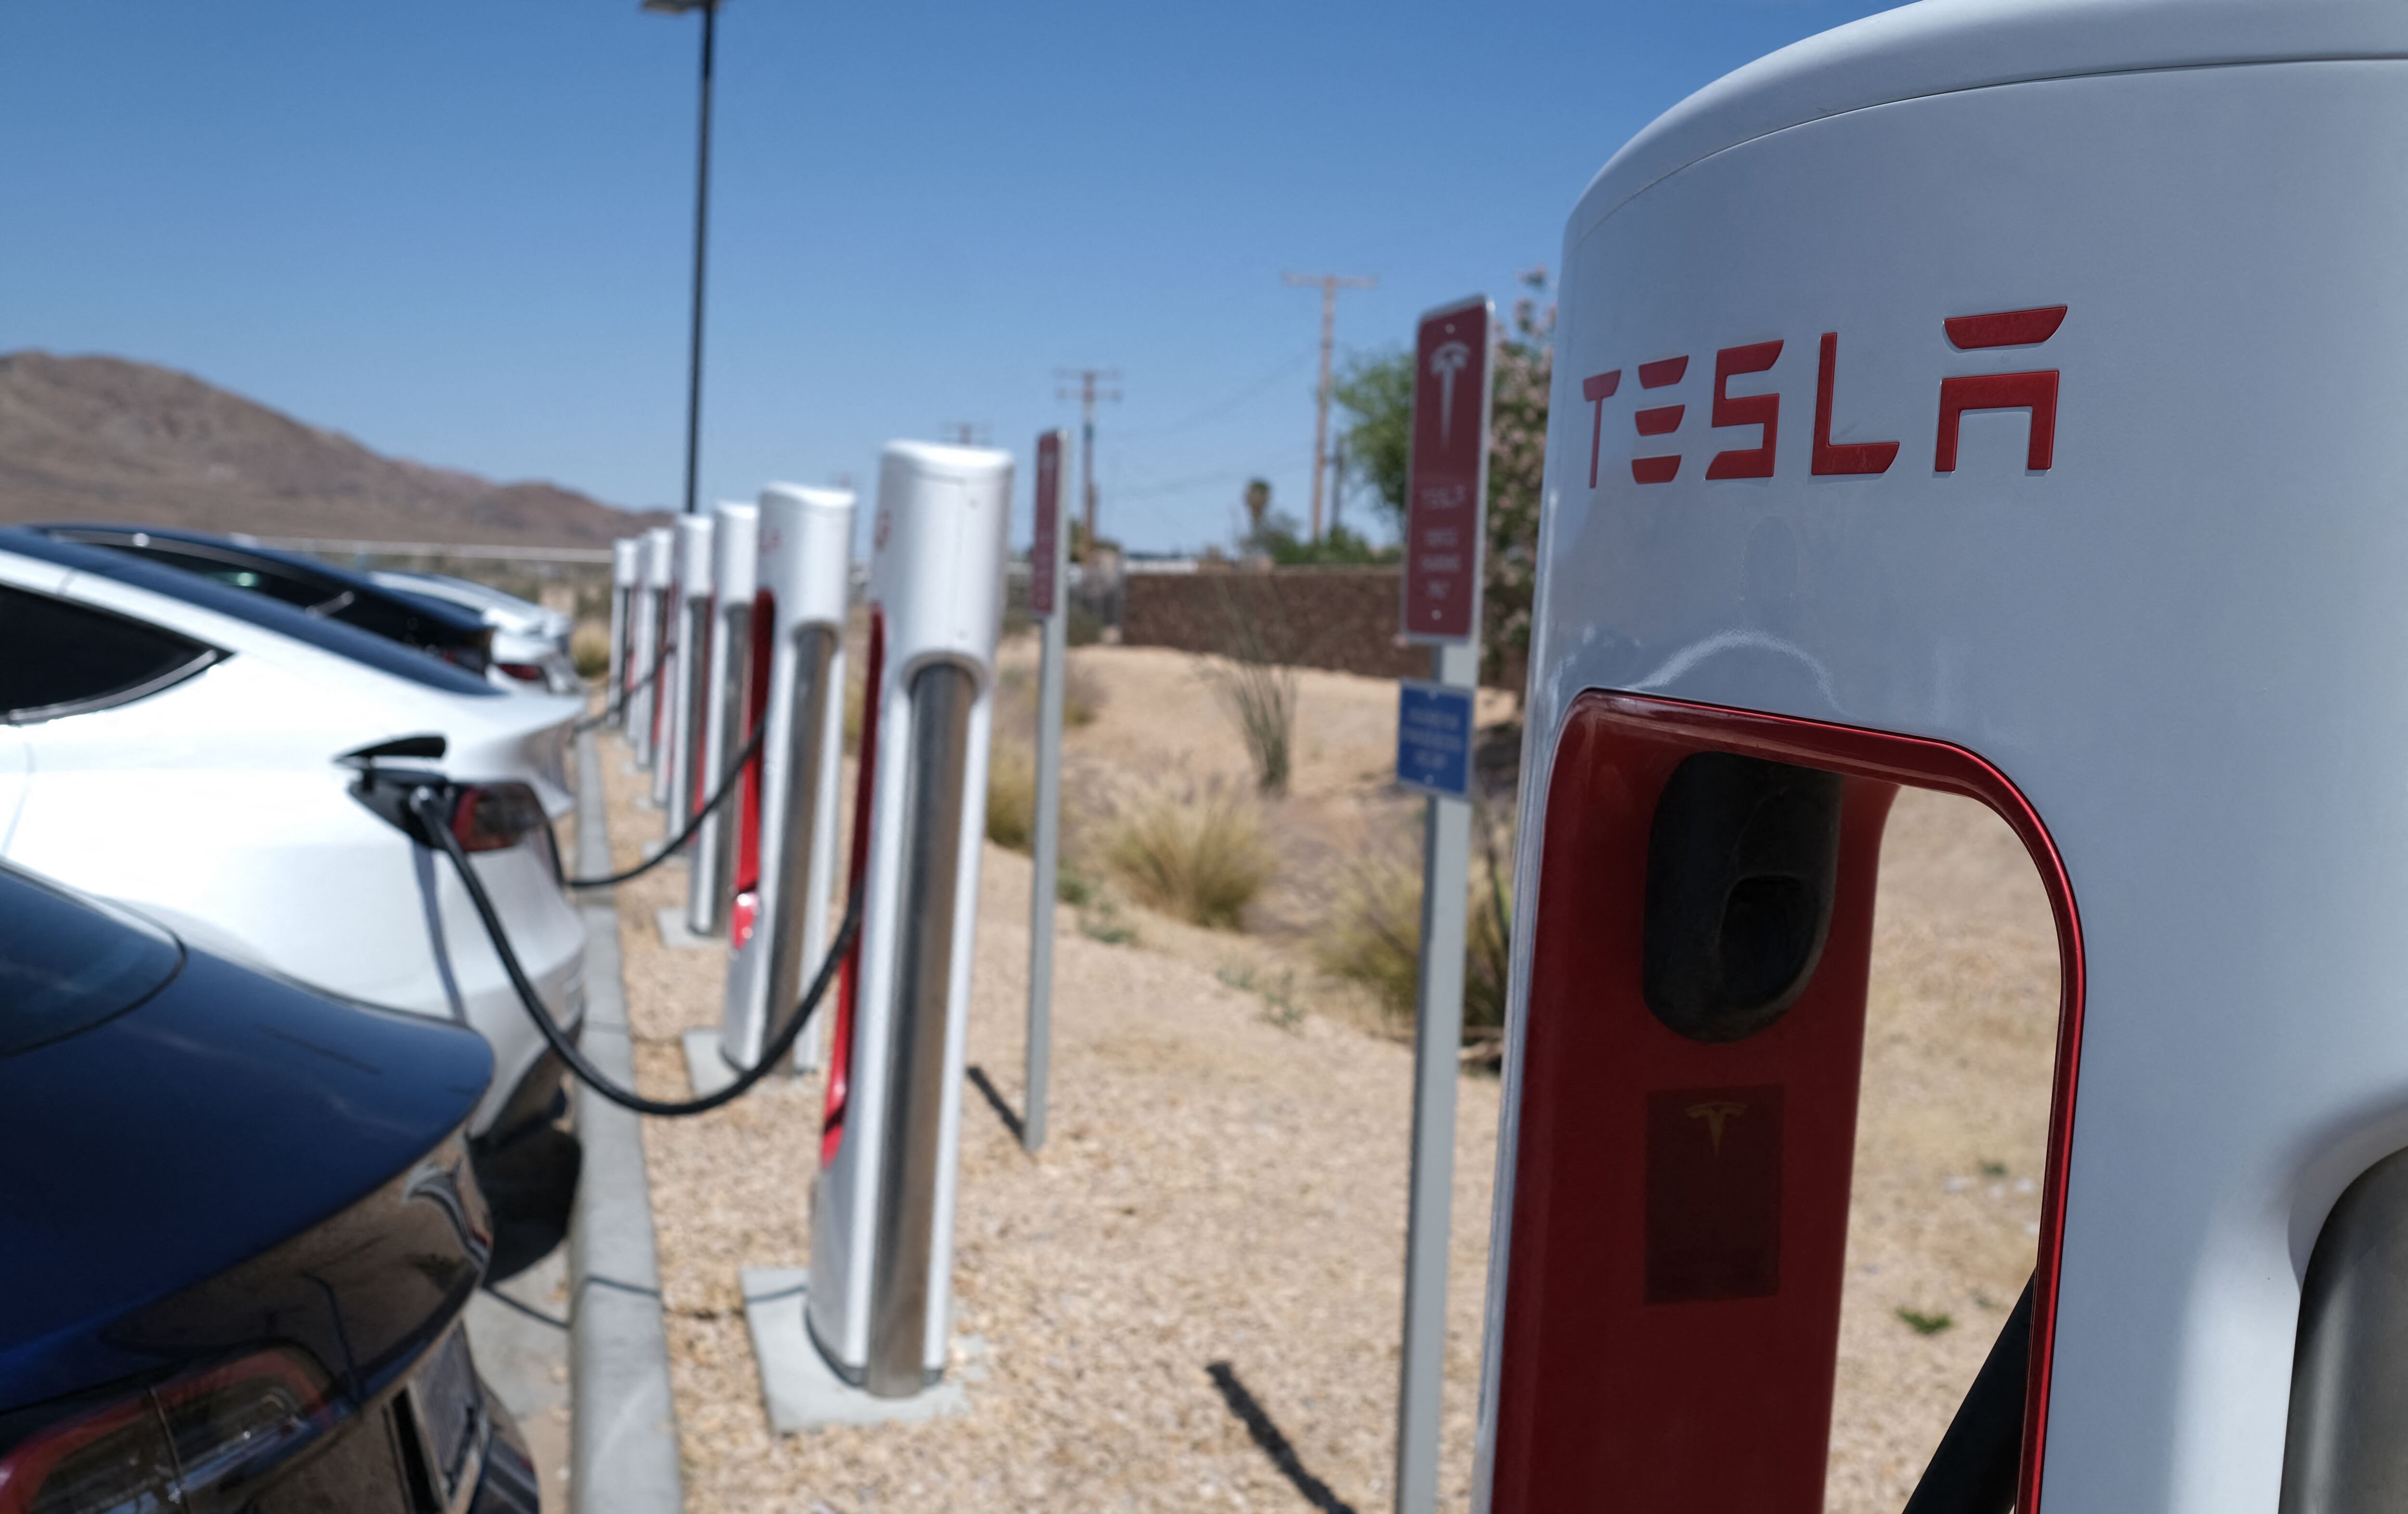 One of the problems with electric cars is recharging on long trips.  Tesla is one of the companies that invests in superchargers, which could power the electric car in just minutes.  (Photo: AFP)